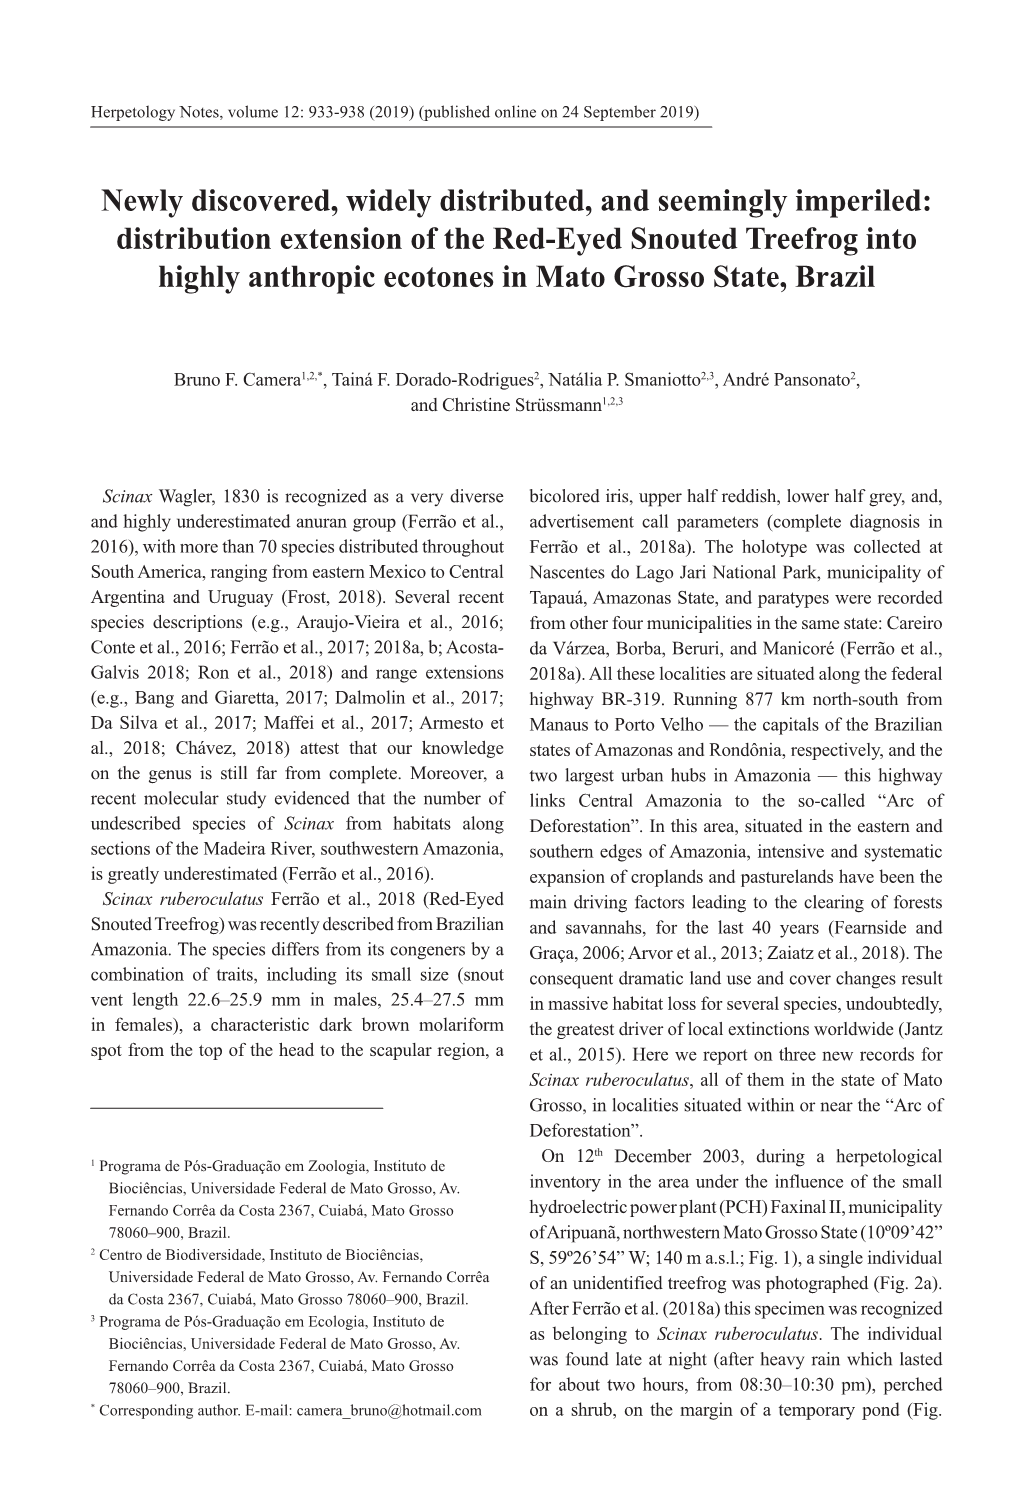 Distribution Extension of the Red-Eyed Snouted Treefrog Into Highly Anthropic Ecotones in Mato Grosso State, Brazil